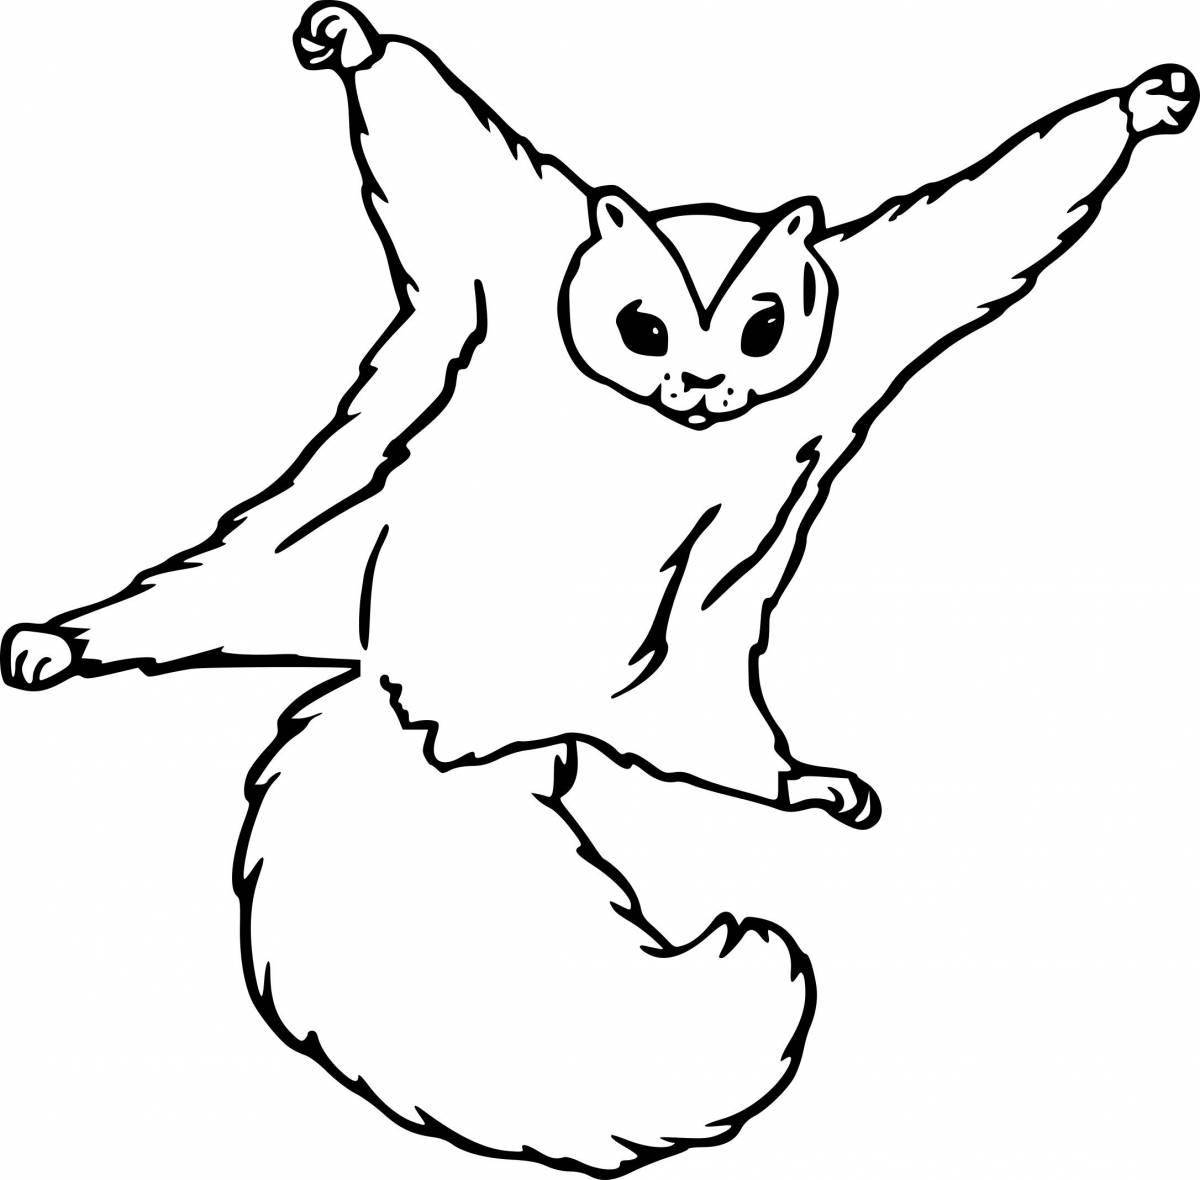 Animated flying cat coloring page